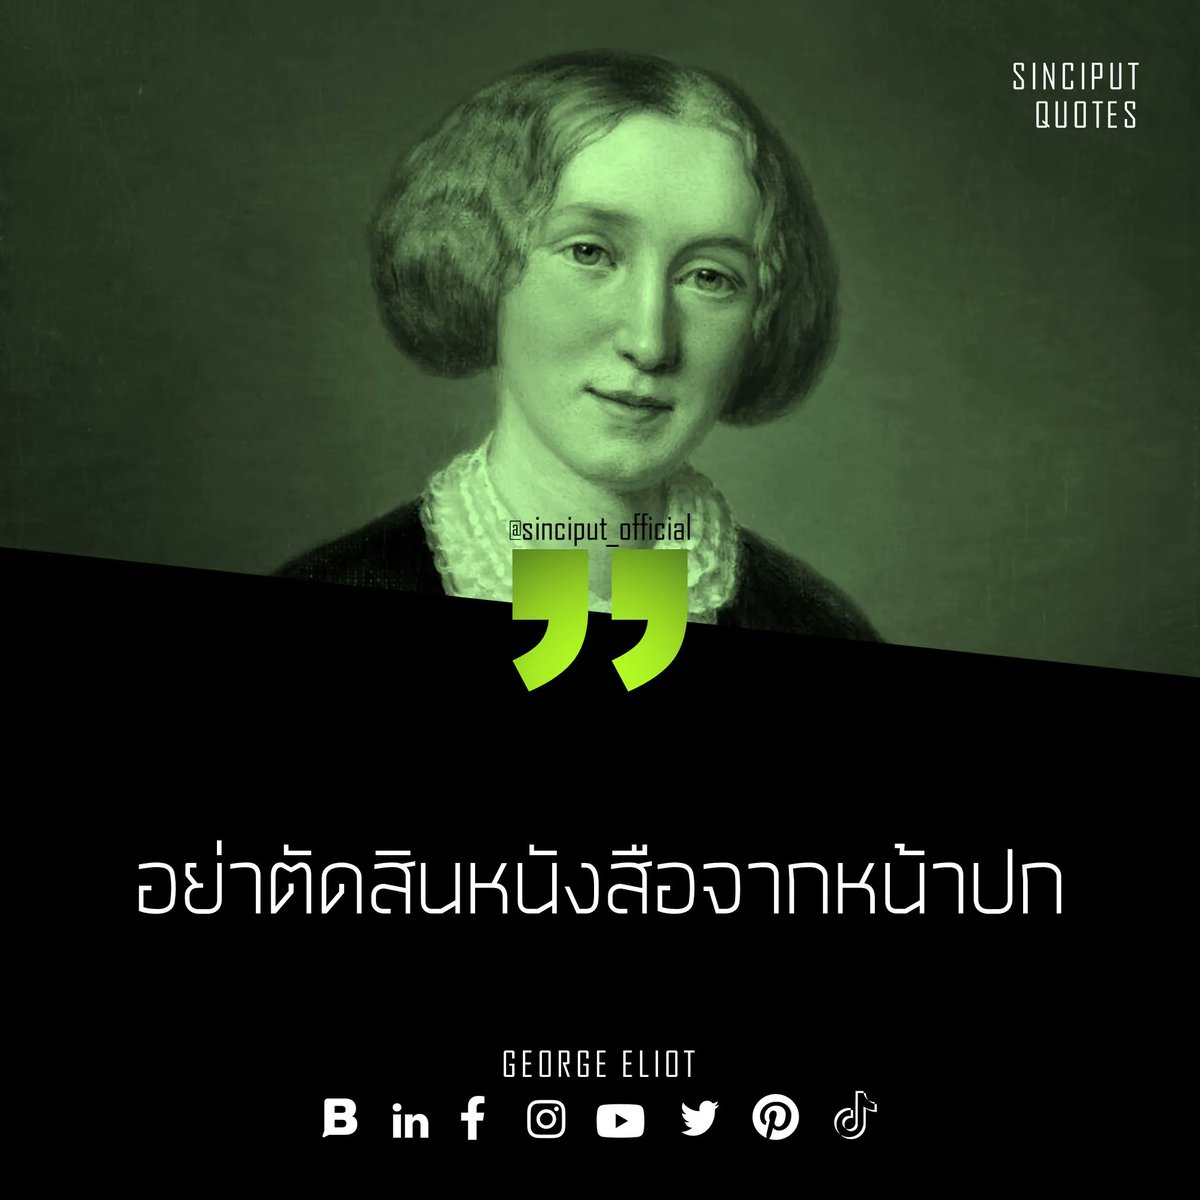 Don't judge a book by its cover. | WISDOM | QUOTES

#sinciput #quote #lifequote #motivation #wisdom #philosophy #book #philosopher #inspiration #wise #novel #spiritual #life #think #georgeeliot #คำคม #คำคมชีวิต #ปรัชญา #แรงบันดาลใจ